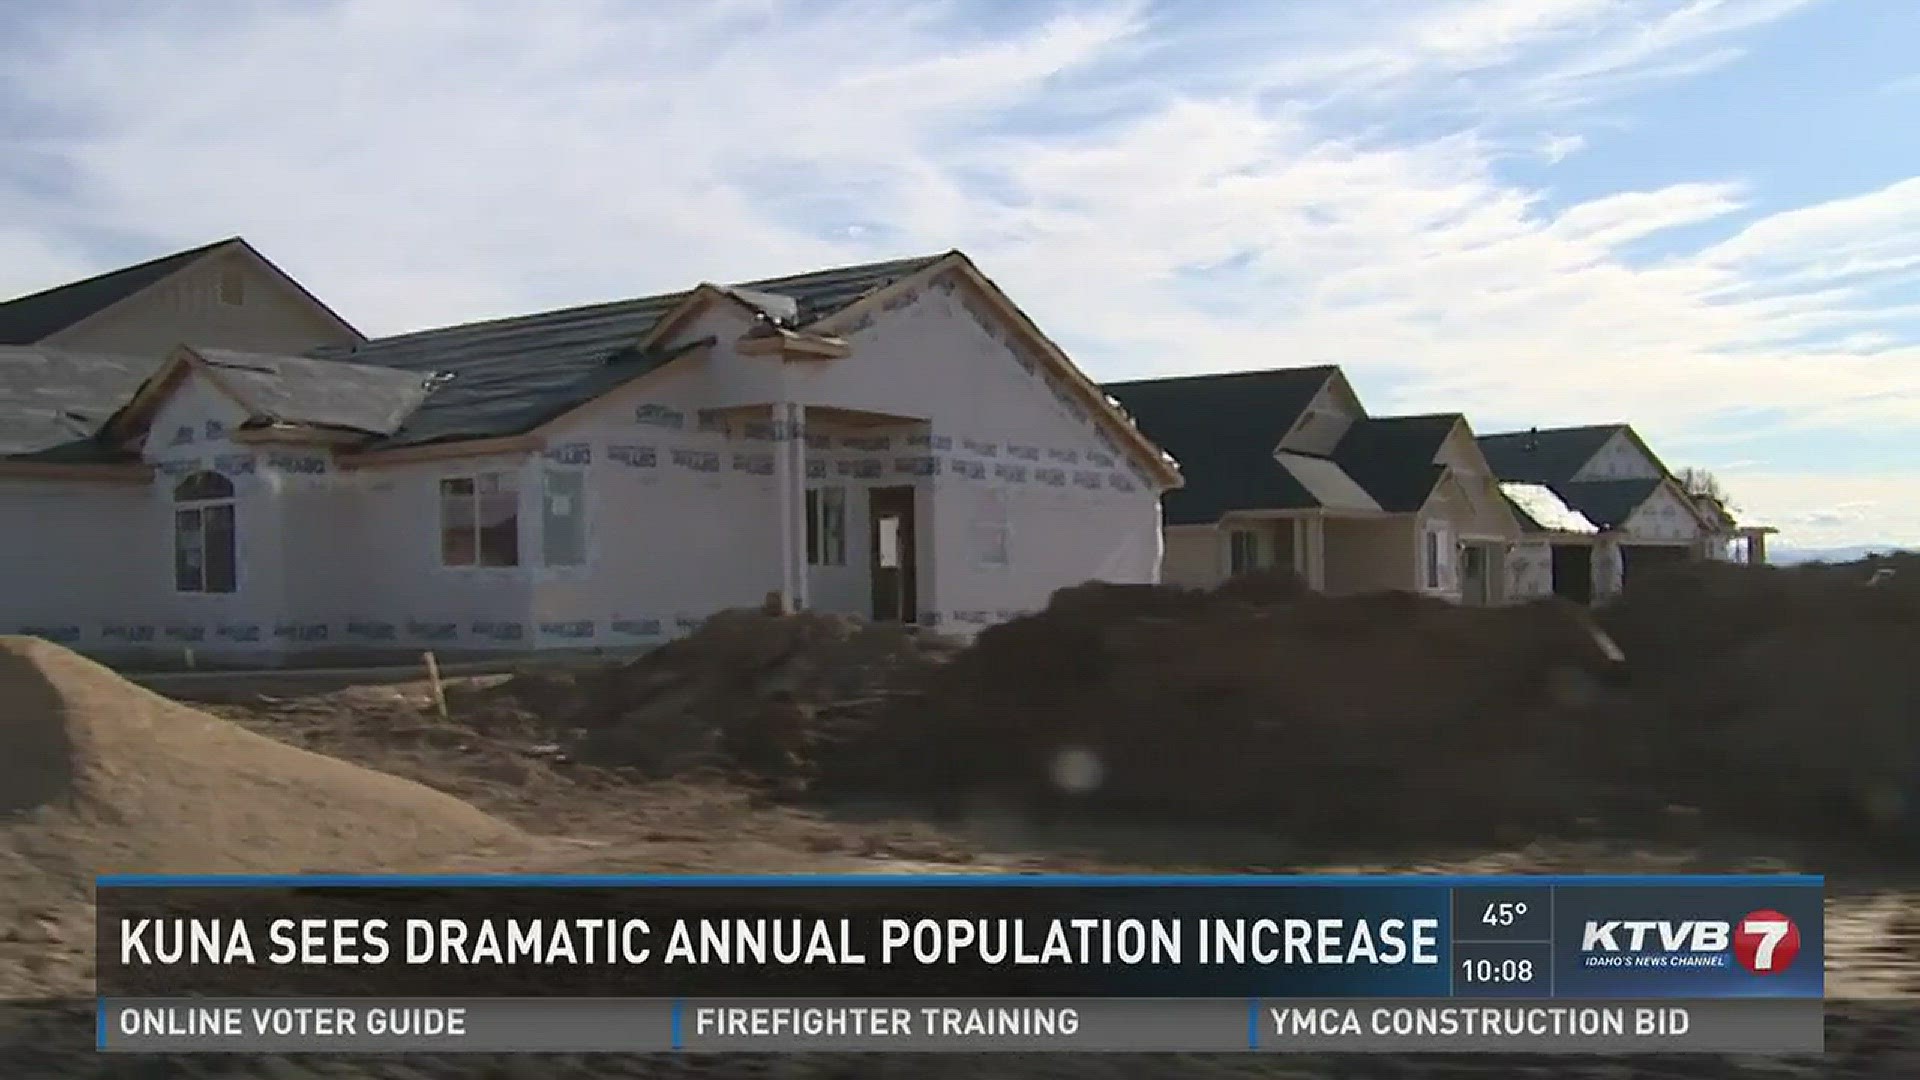 Kuna sees dramatic annual population increase.